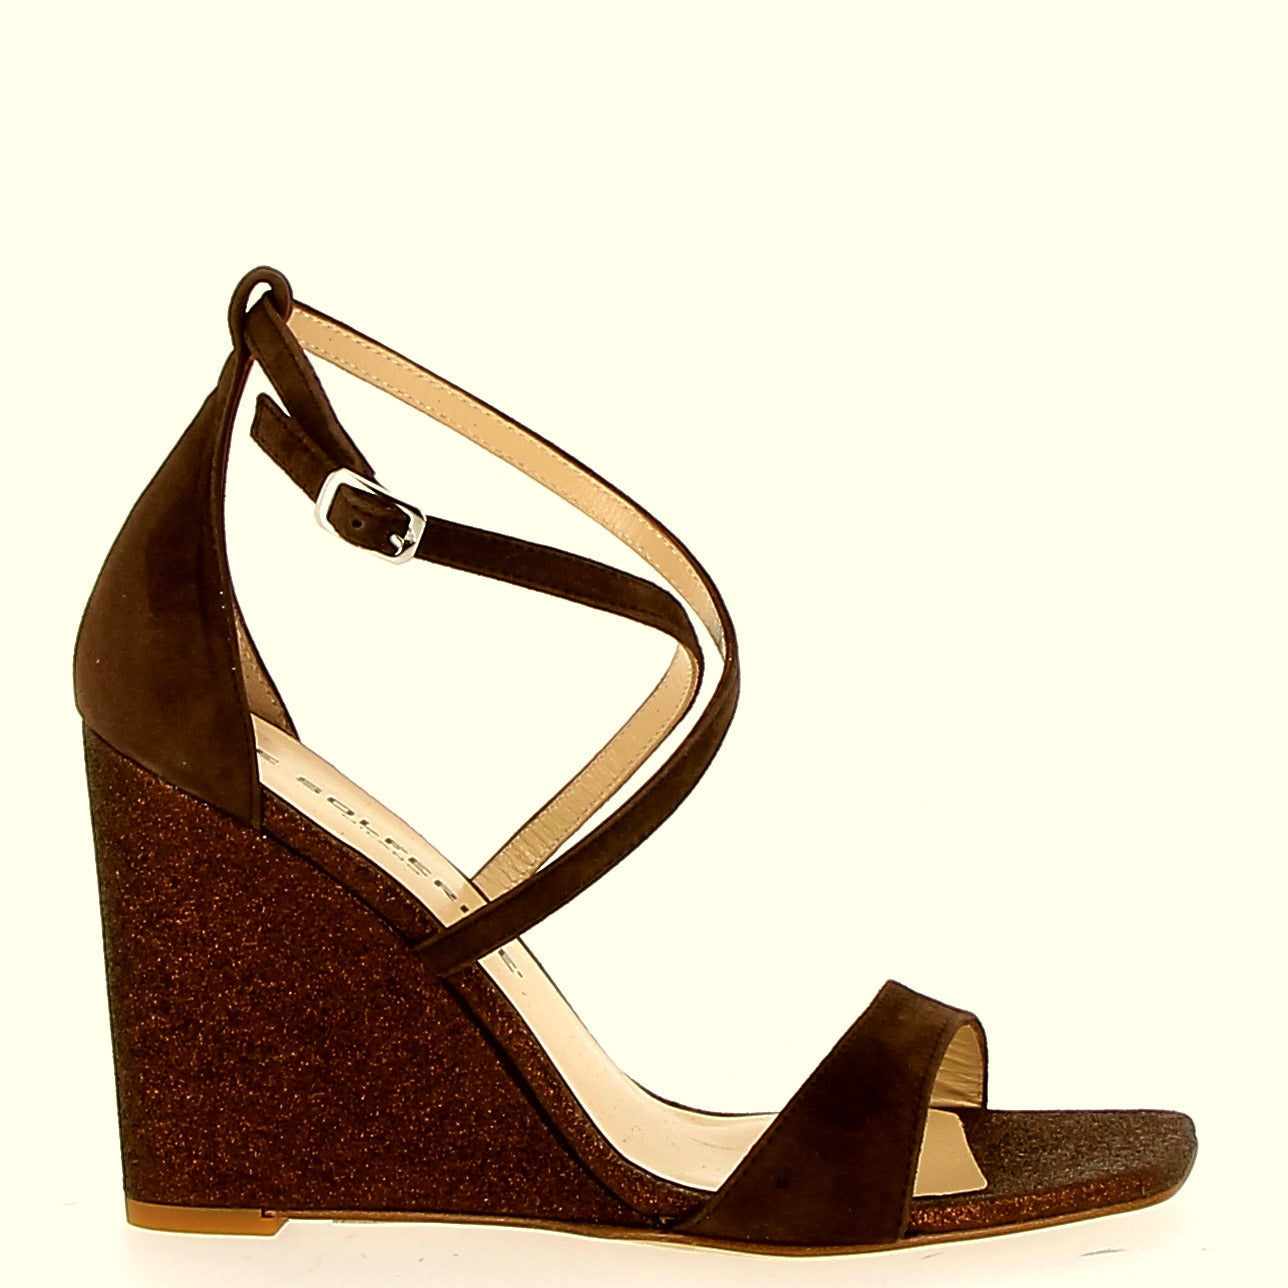 Moro suede sandal with glitter wedge